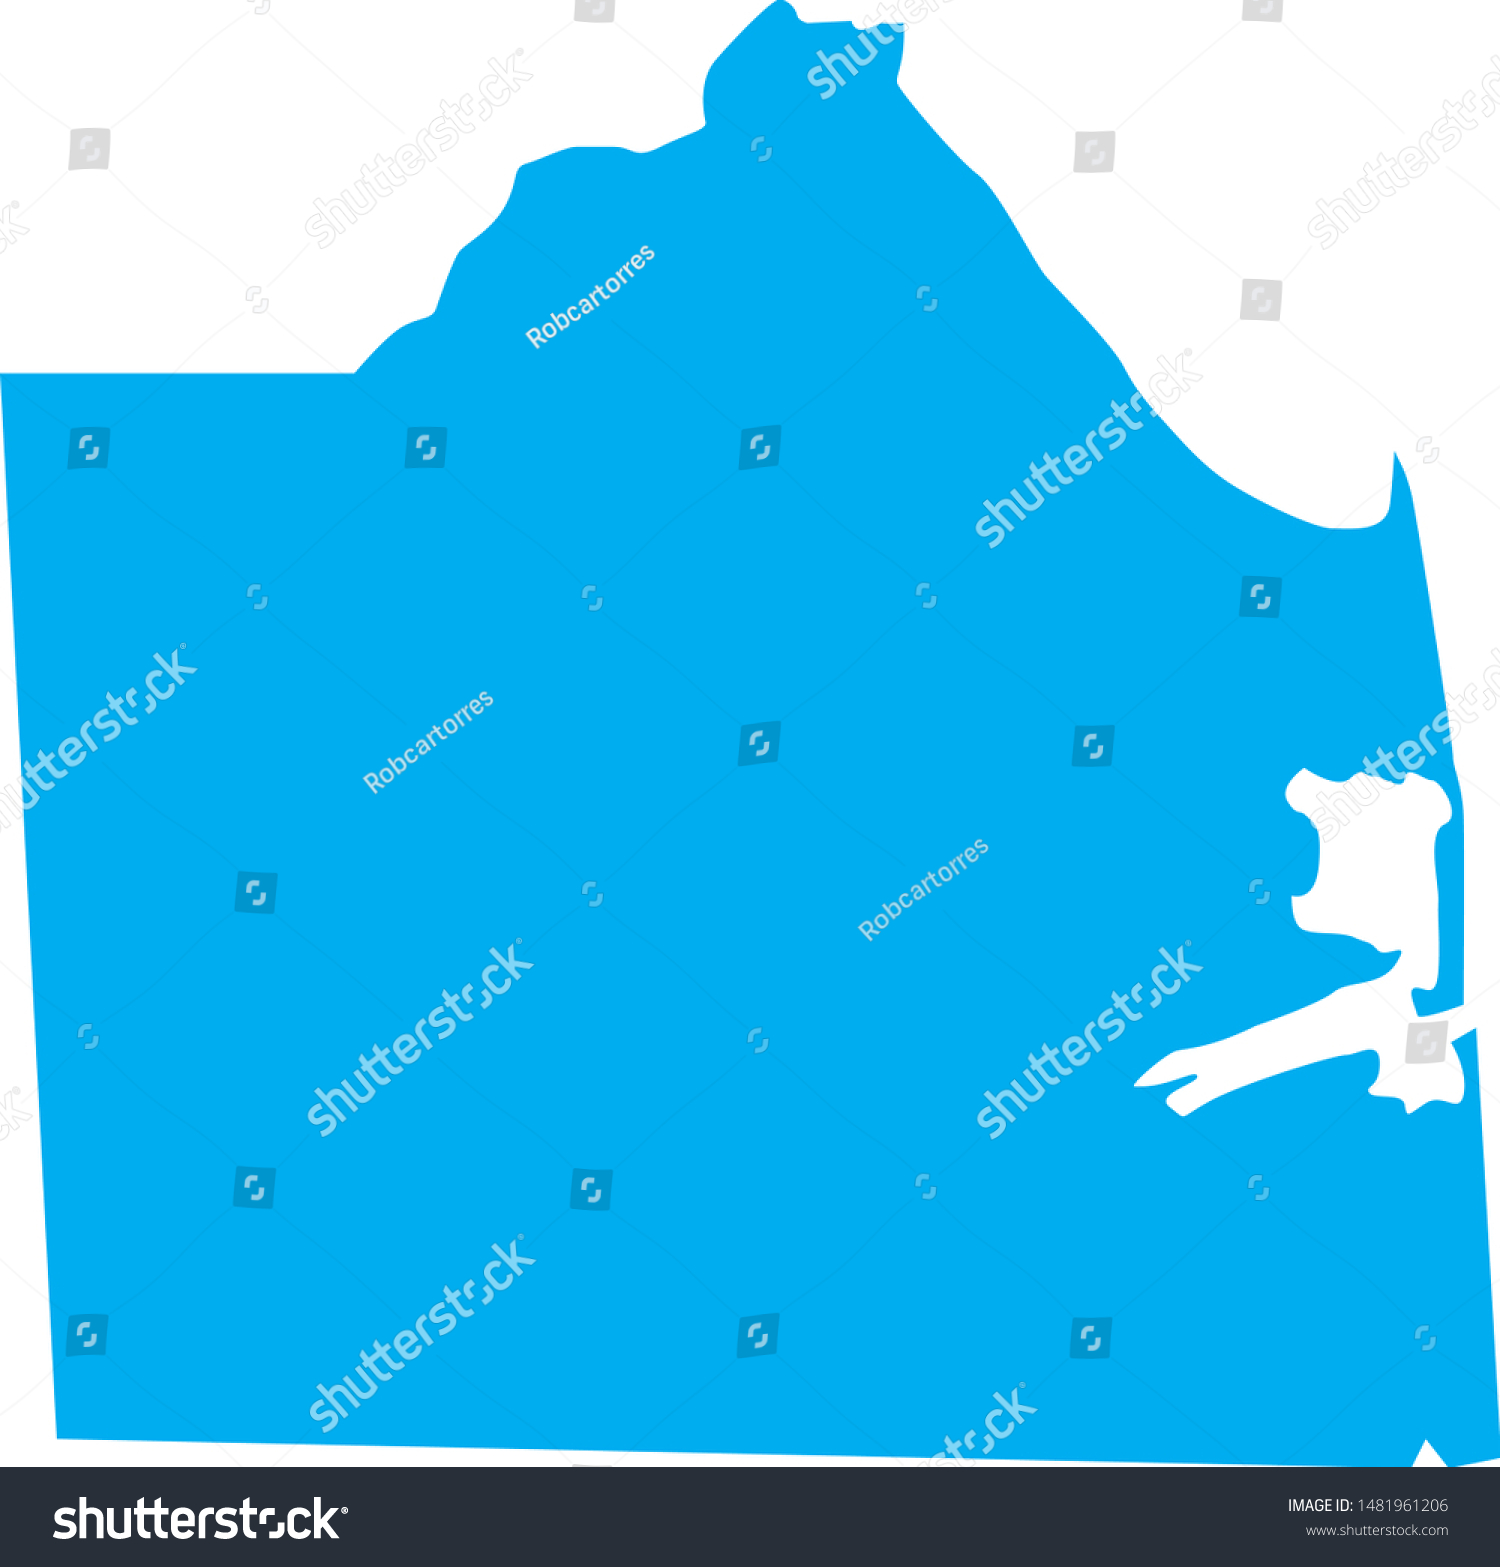 Sussex County map in the state of Delaware #1481961206